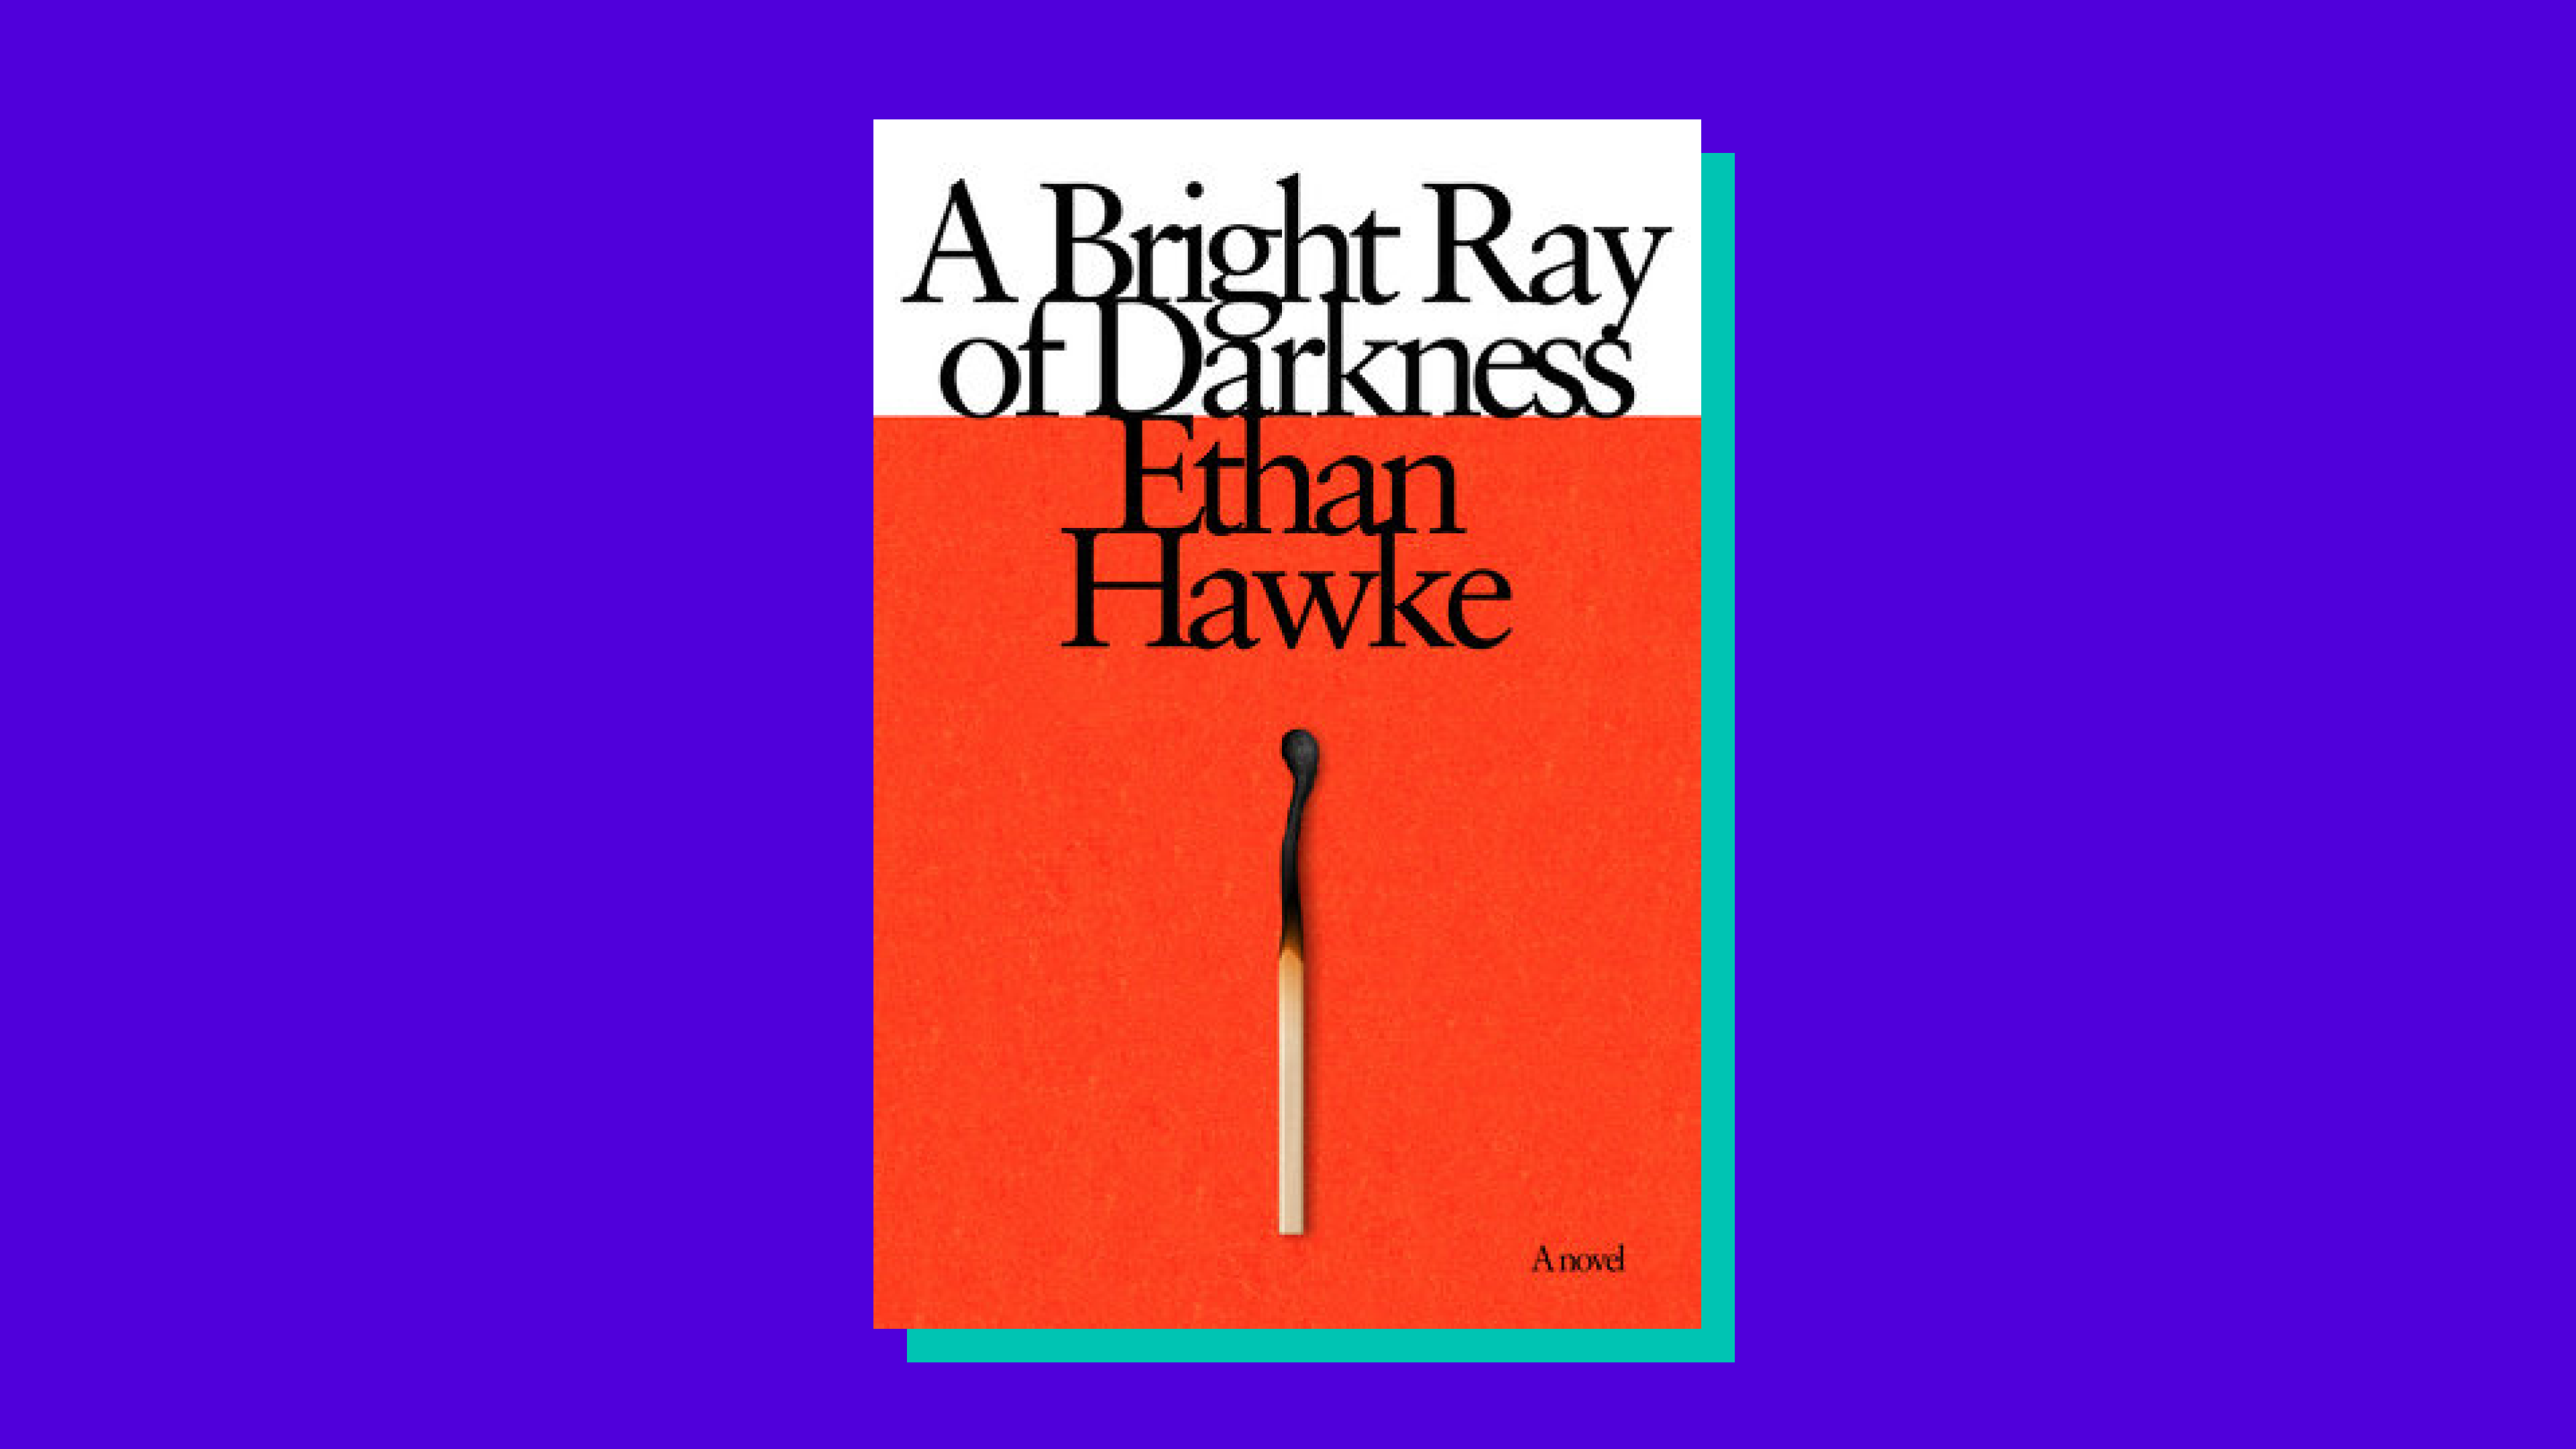 “A Bright Ray of Darkness,” by Ethan Hawke